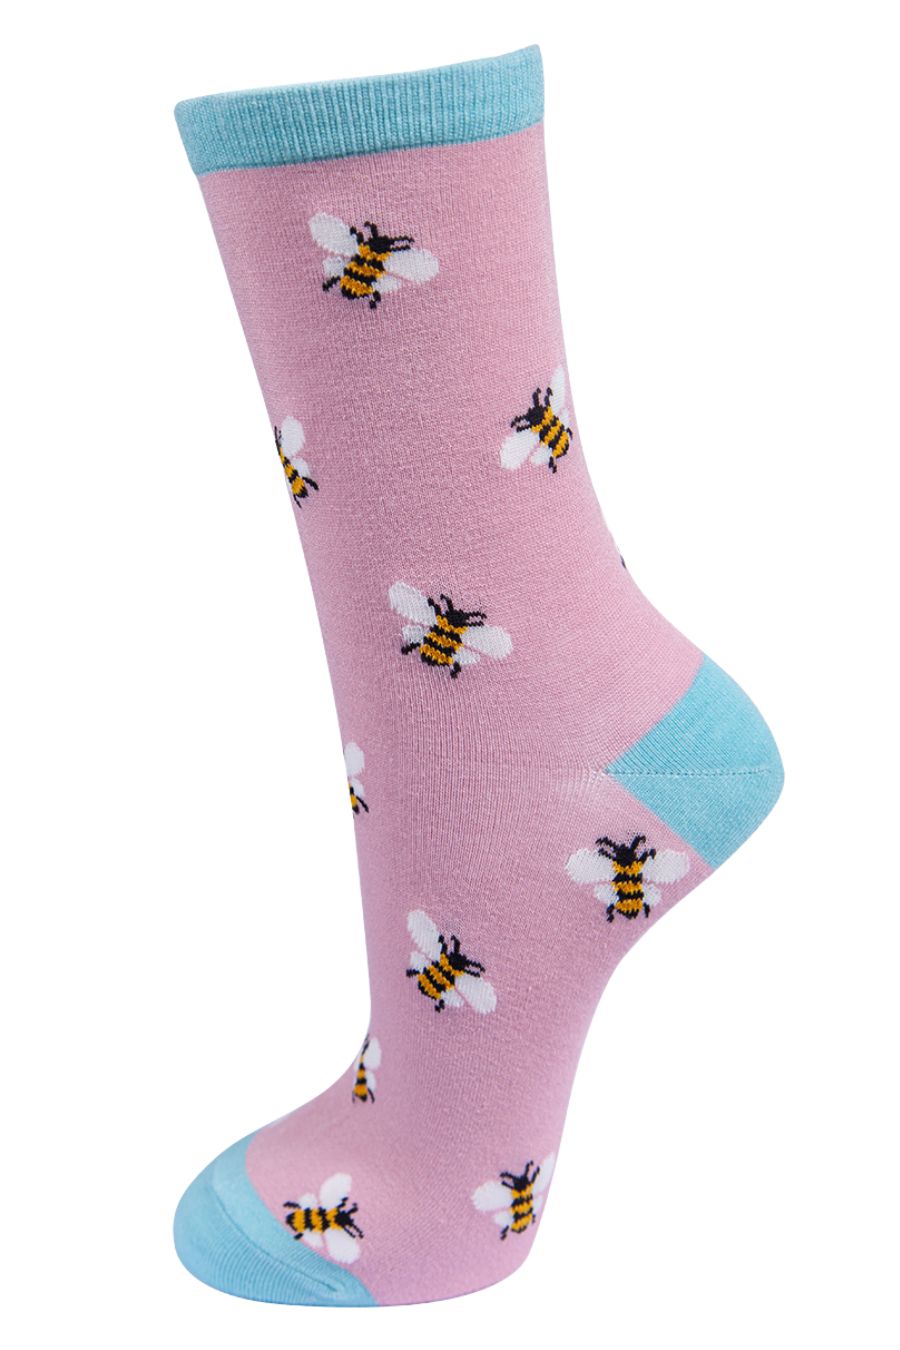 light pink ankle socks with an all over bee print